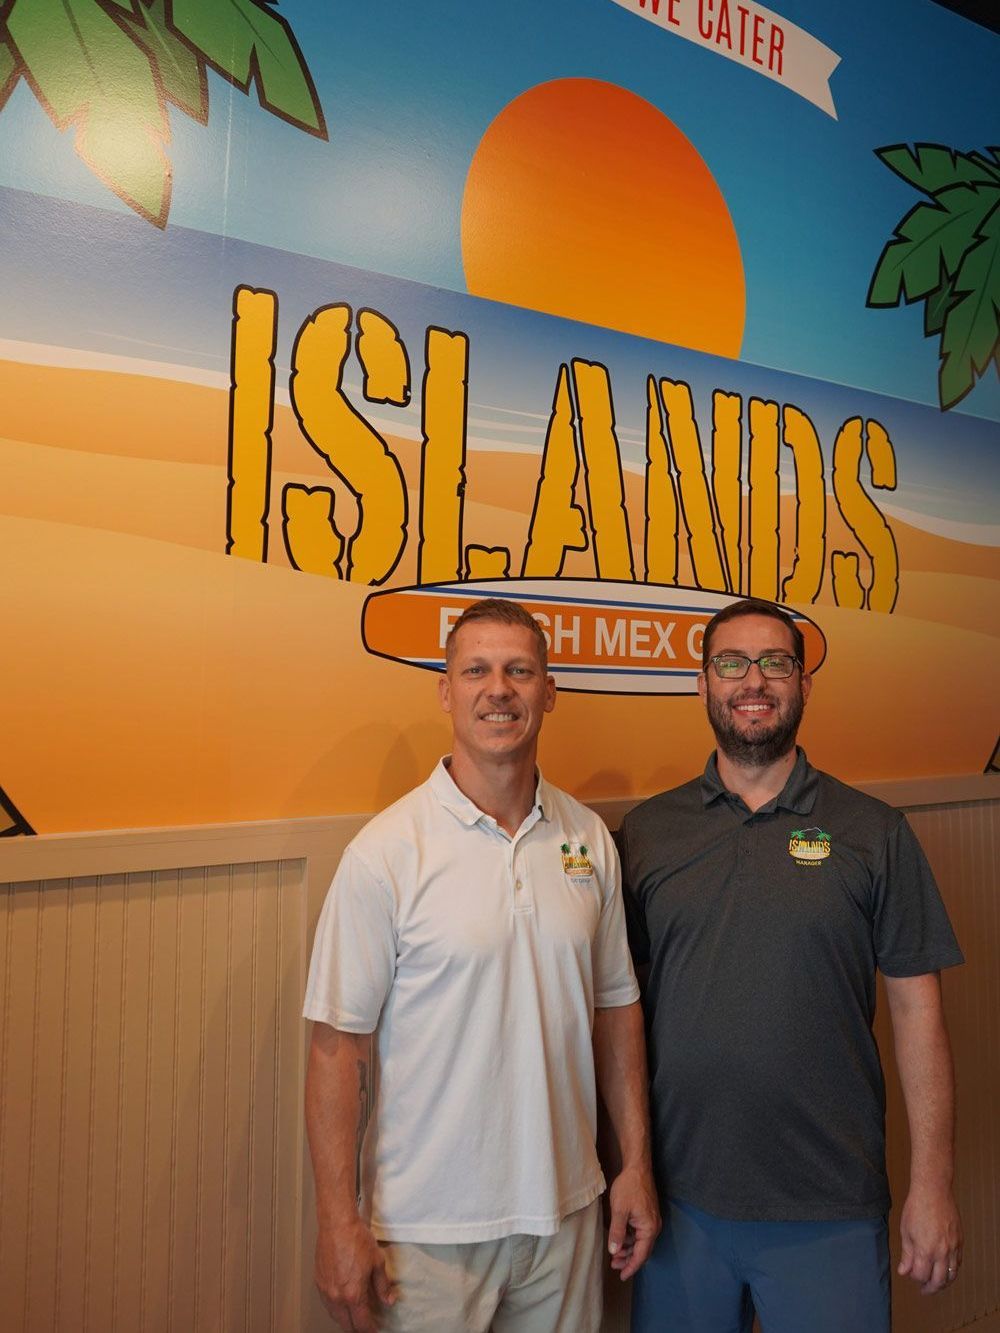 the two founders of islands fresh mex grill